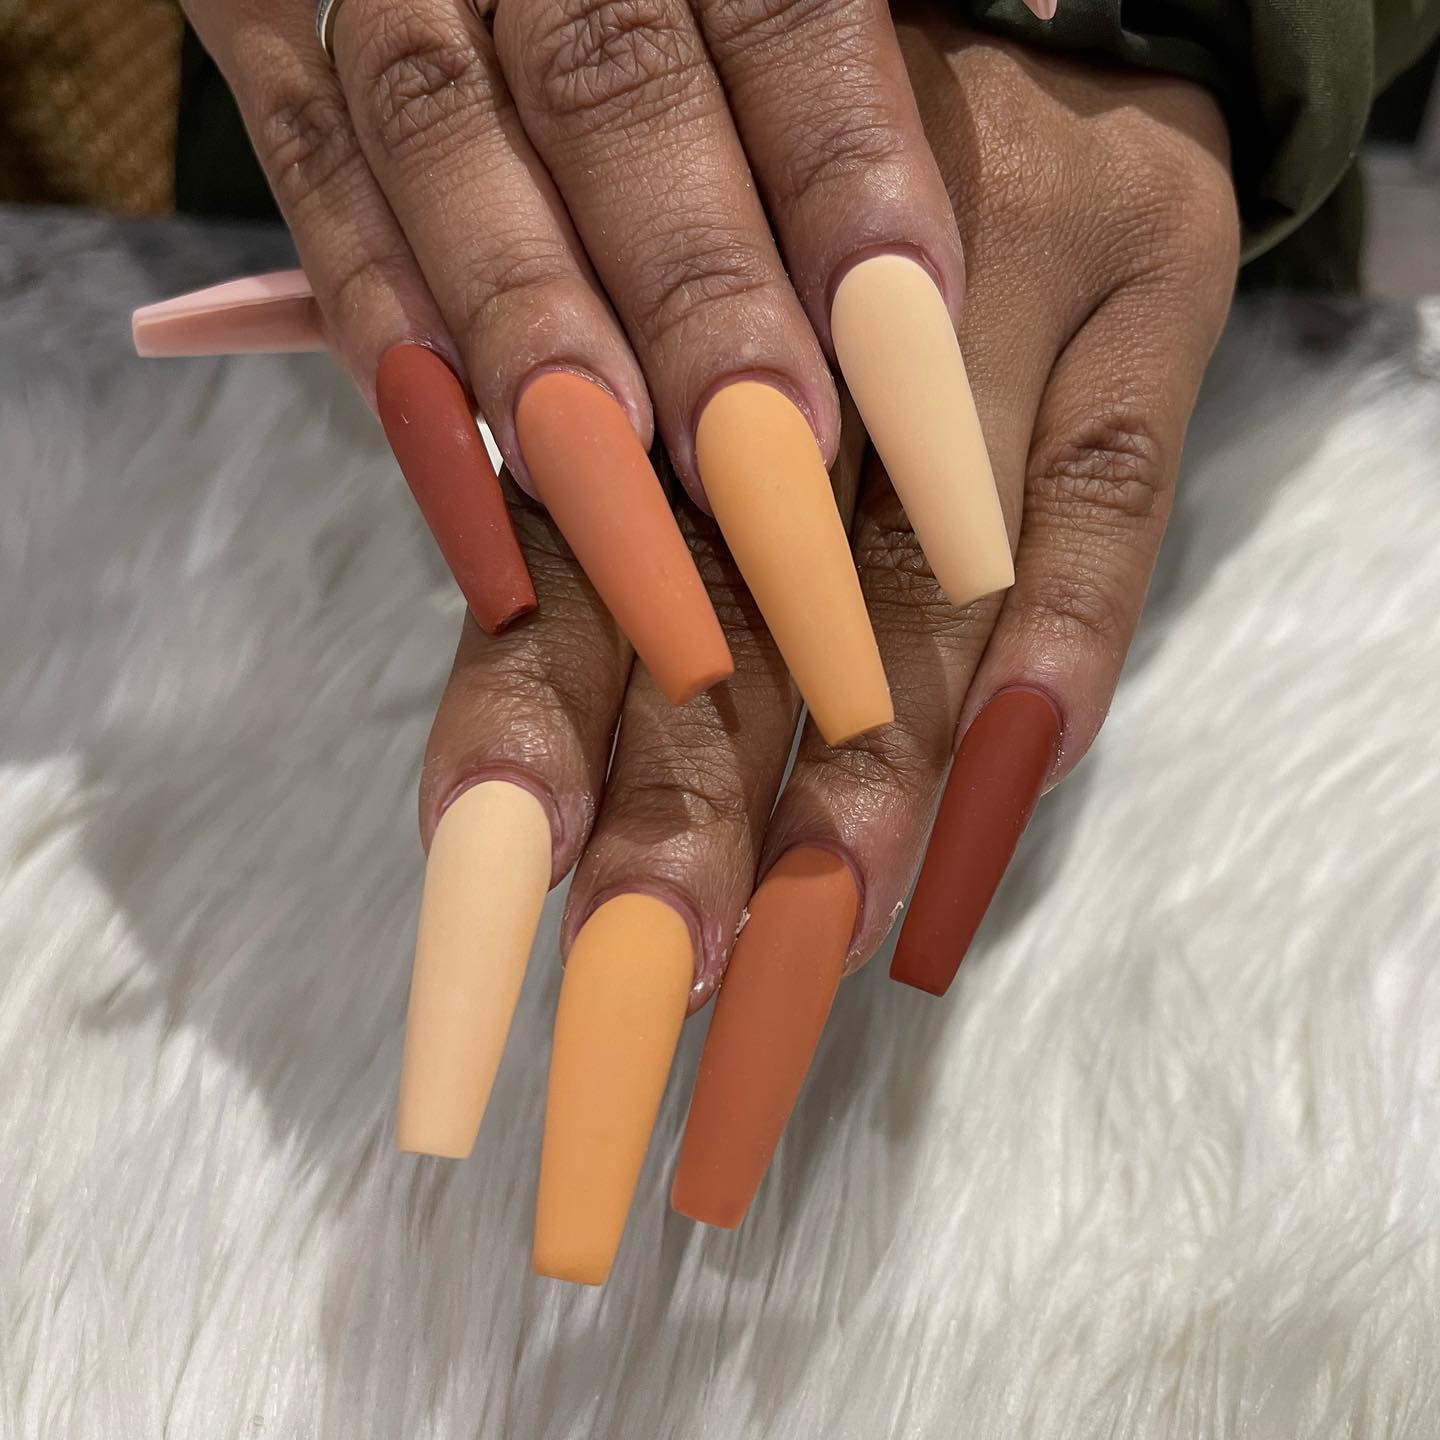 How about this long matte coffin acrylic manicure? Go for all the shades of nude and show them off for any type of event.